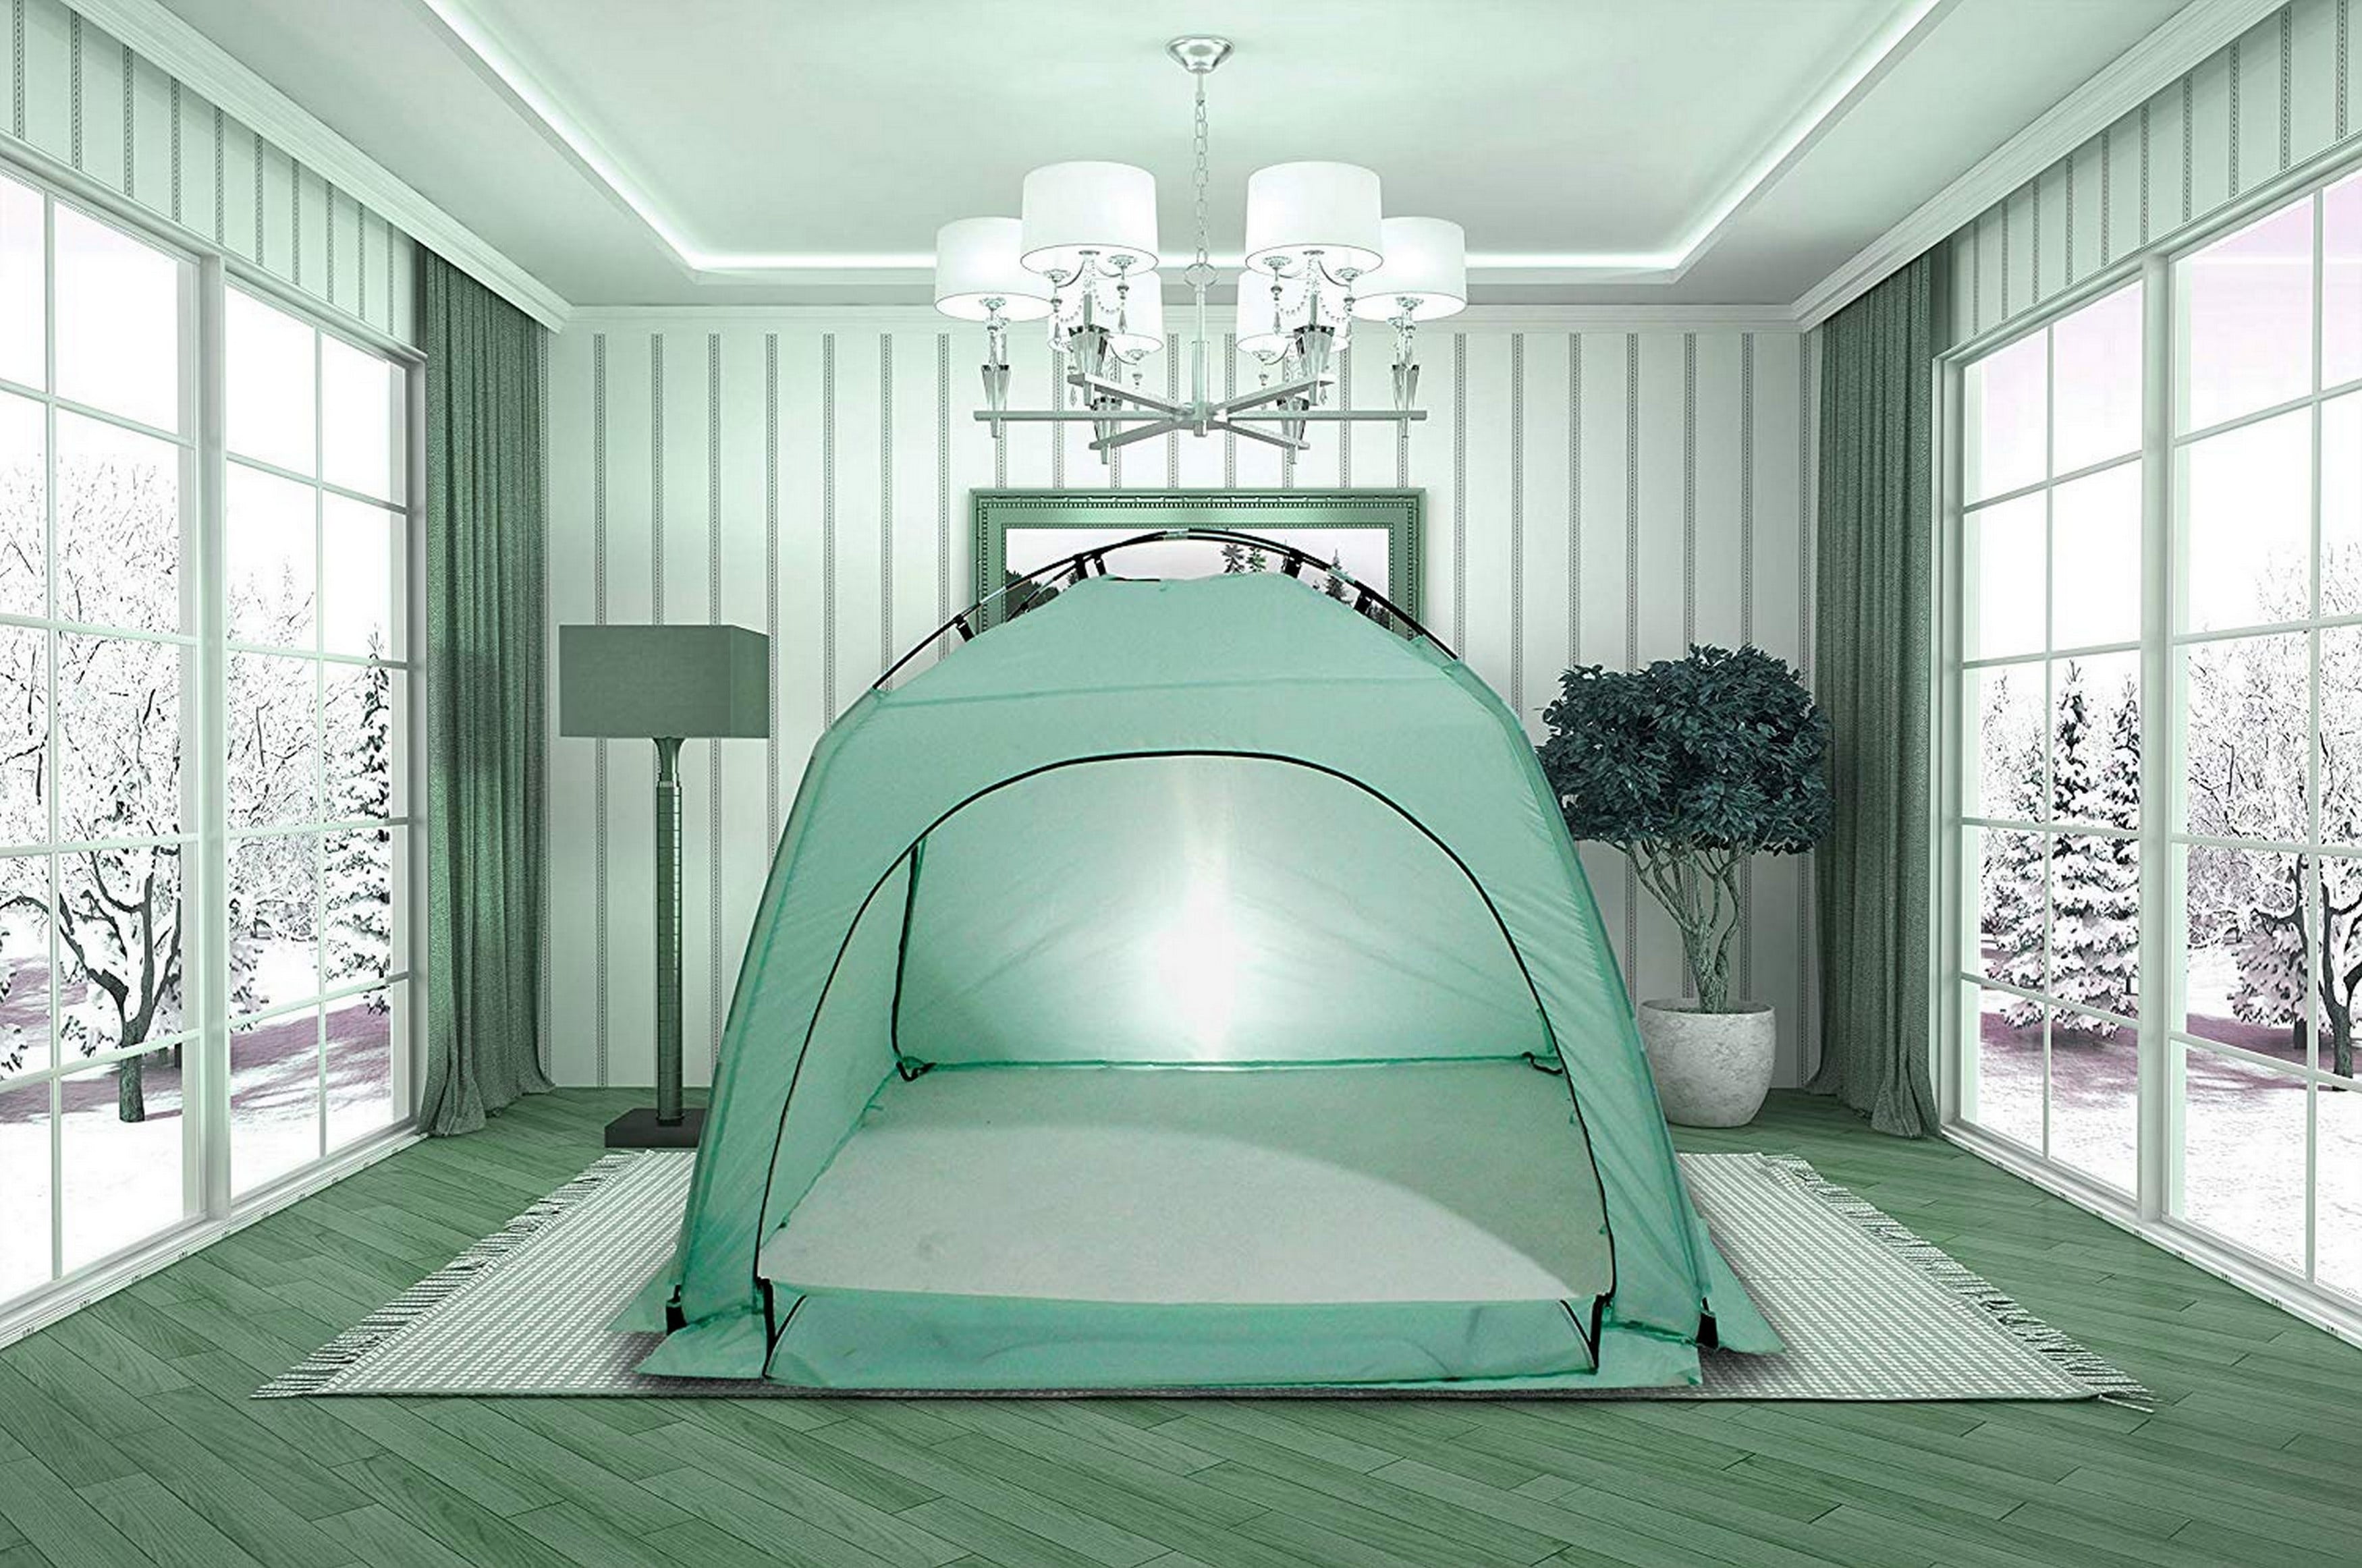 bed tents for kids